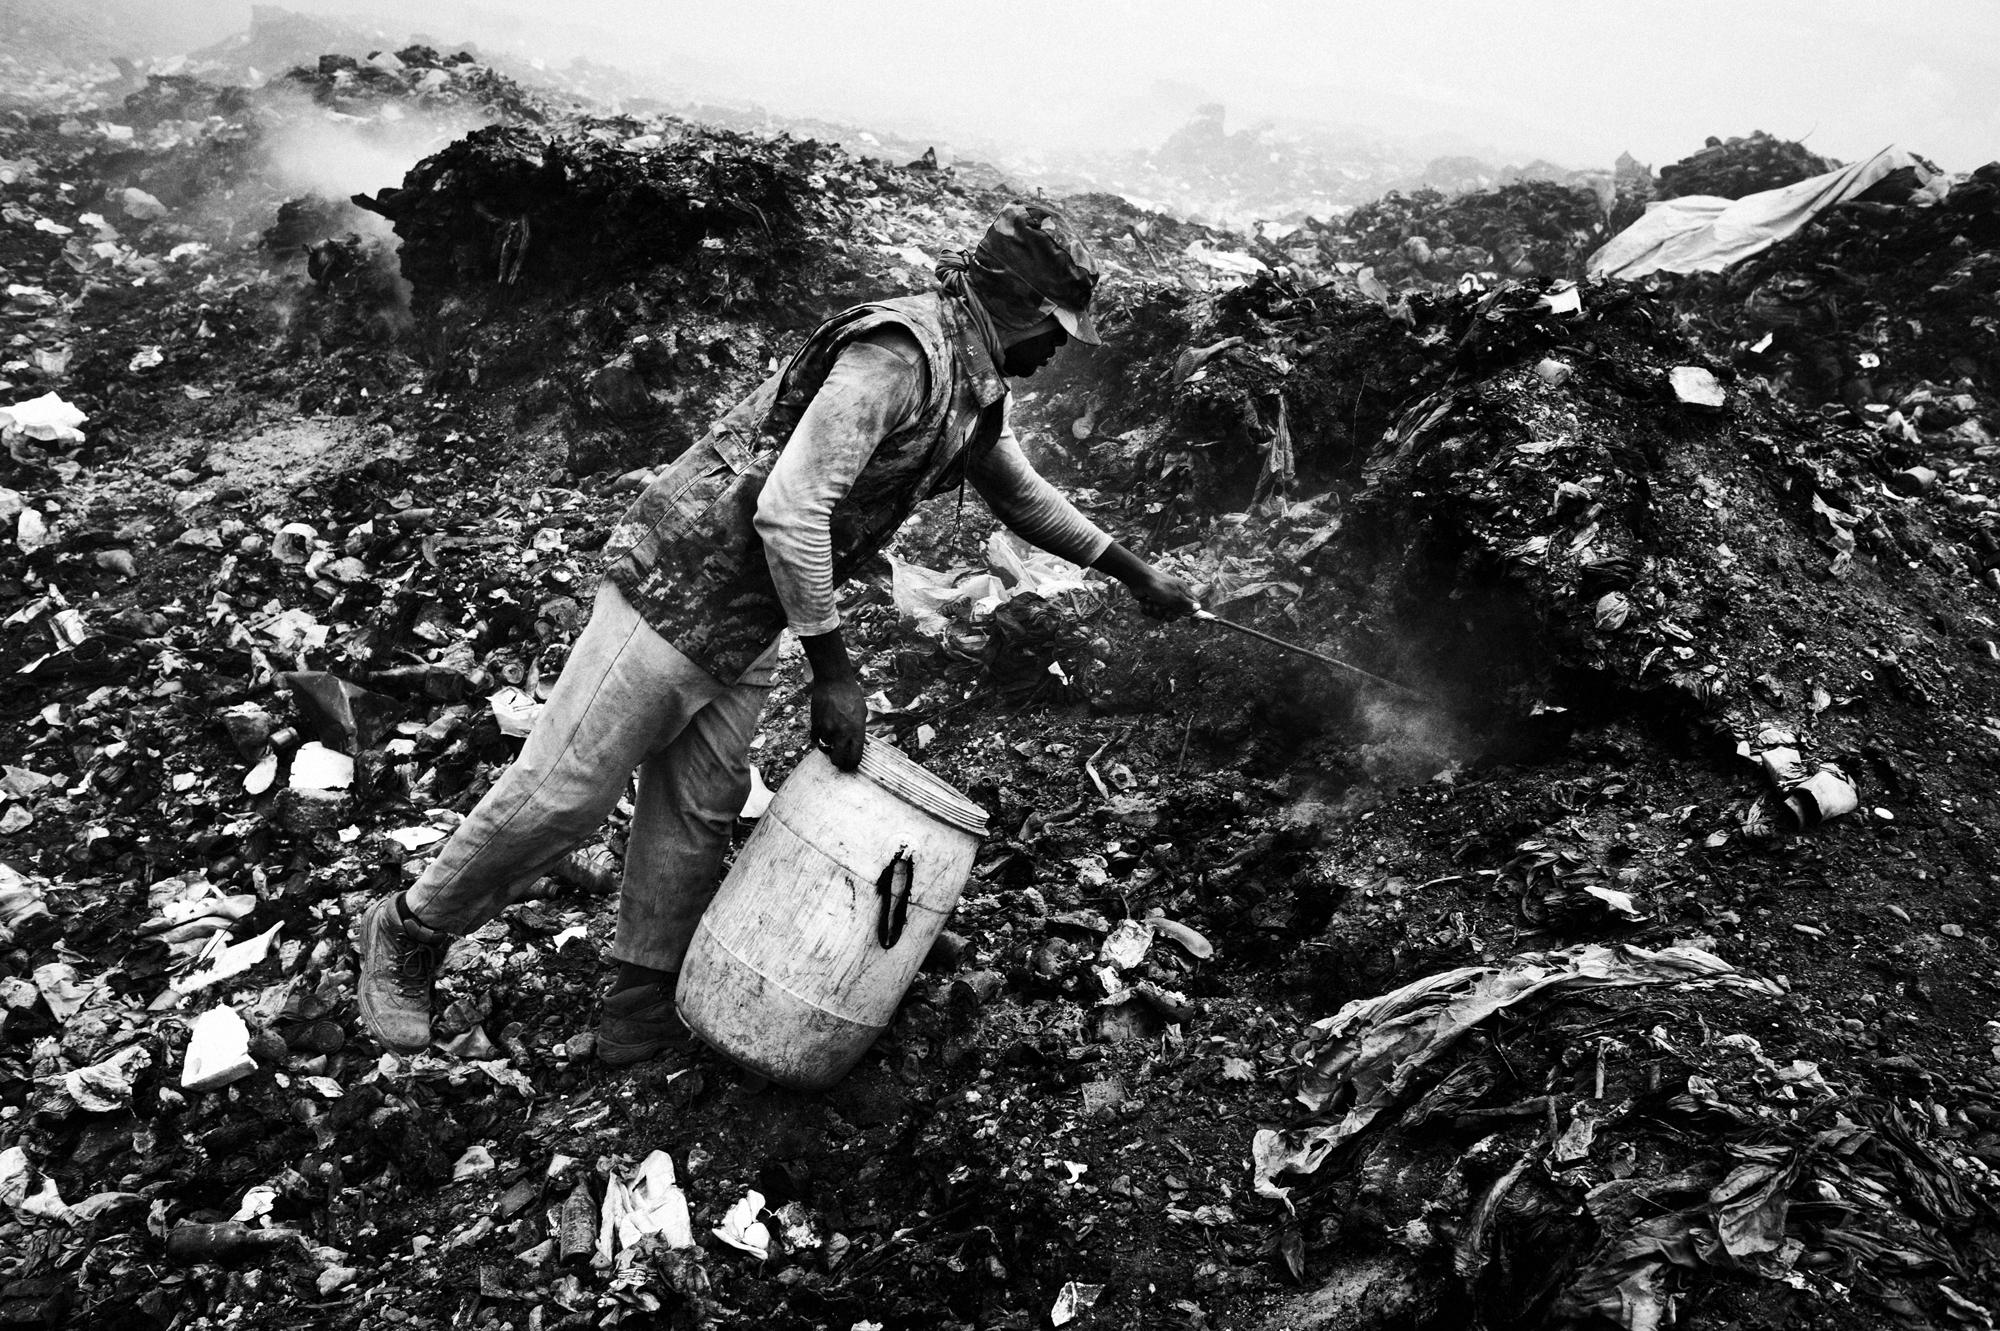 Private hell - Port au Prince.June 2010.A man walks through a garbage...